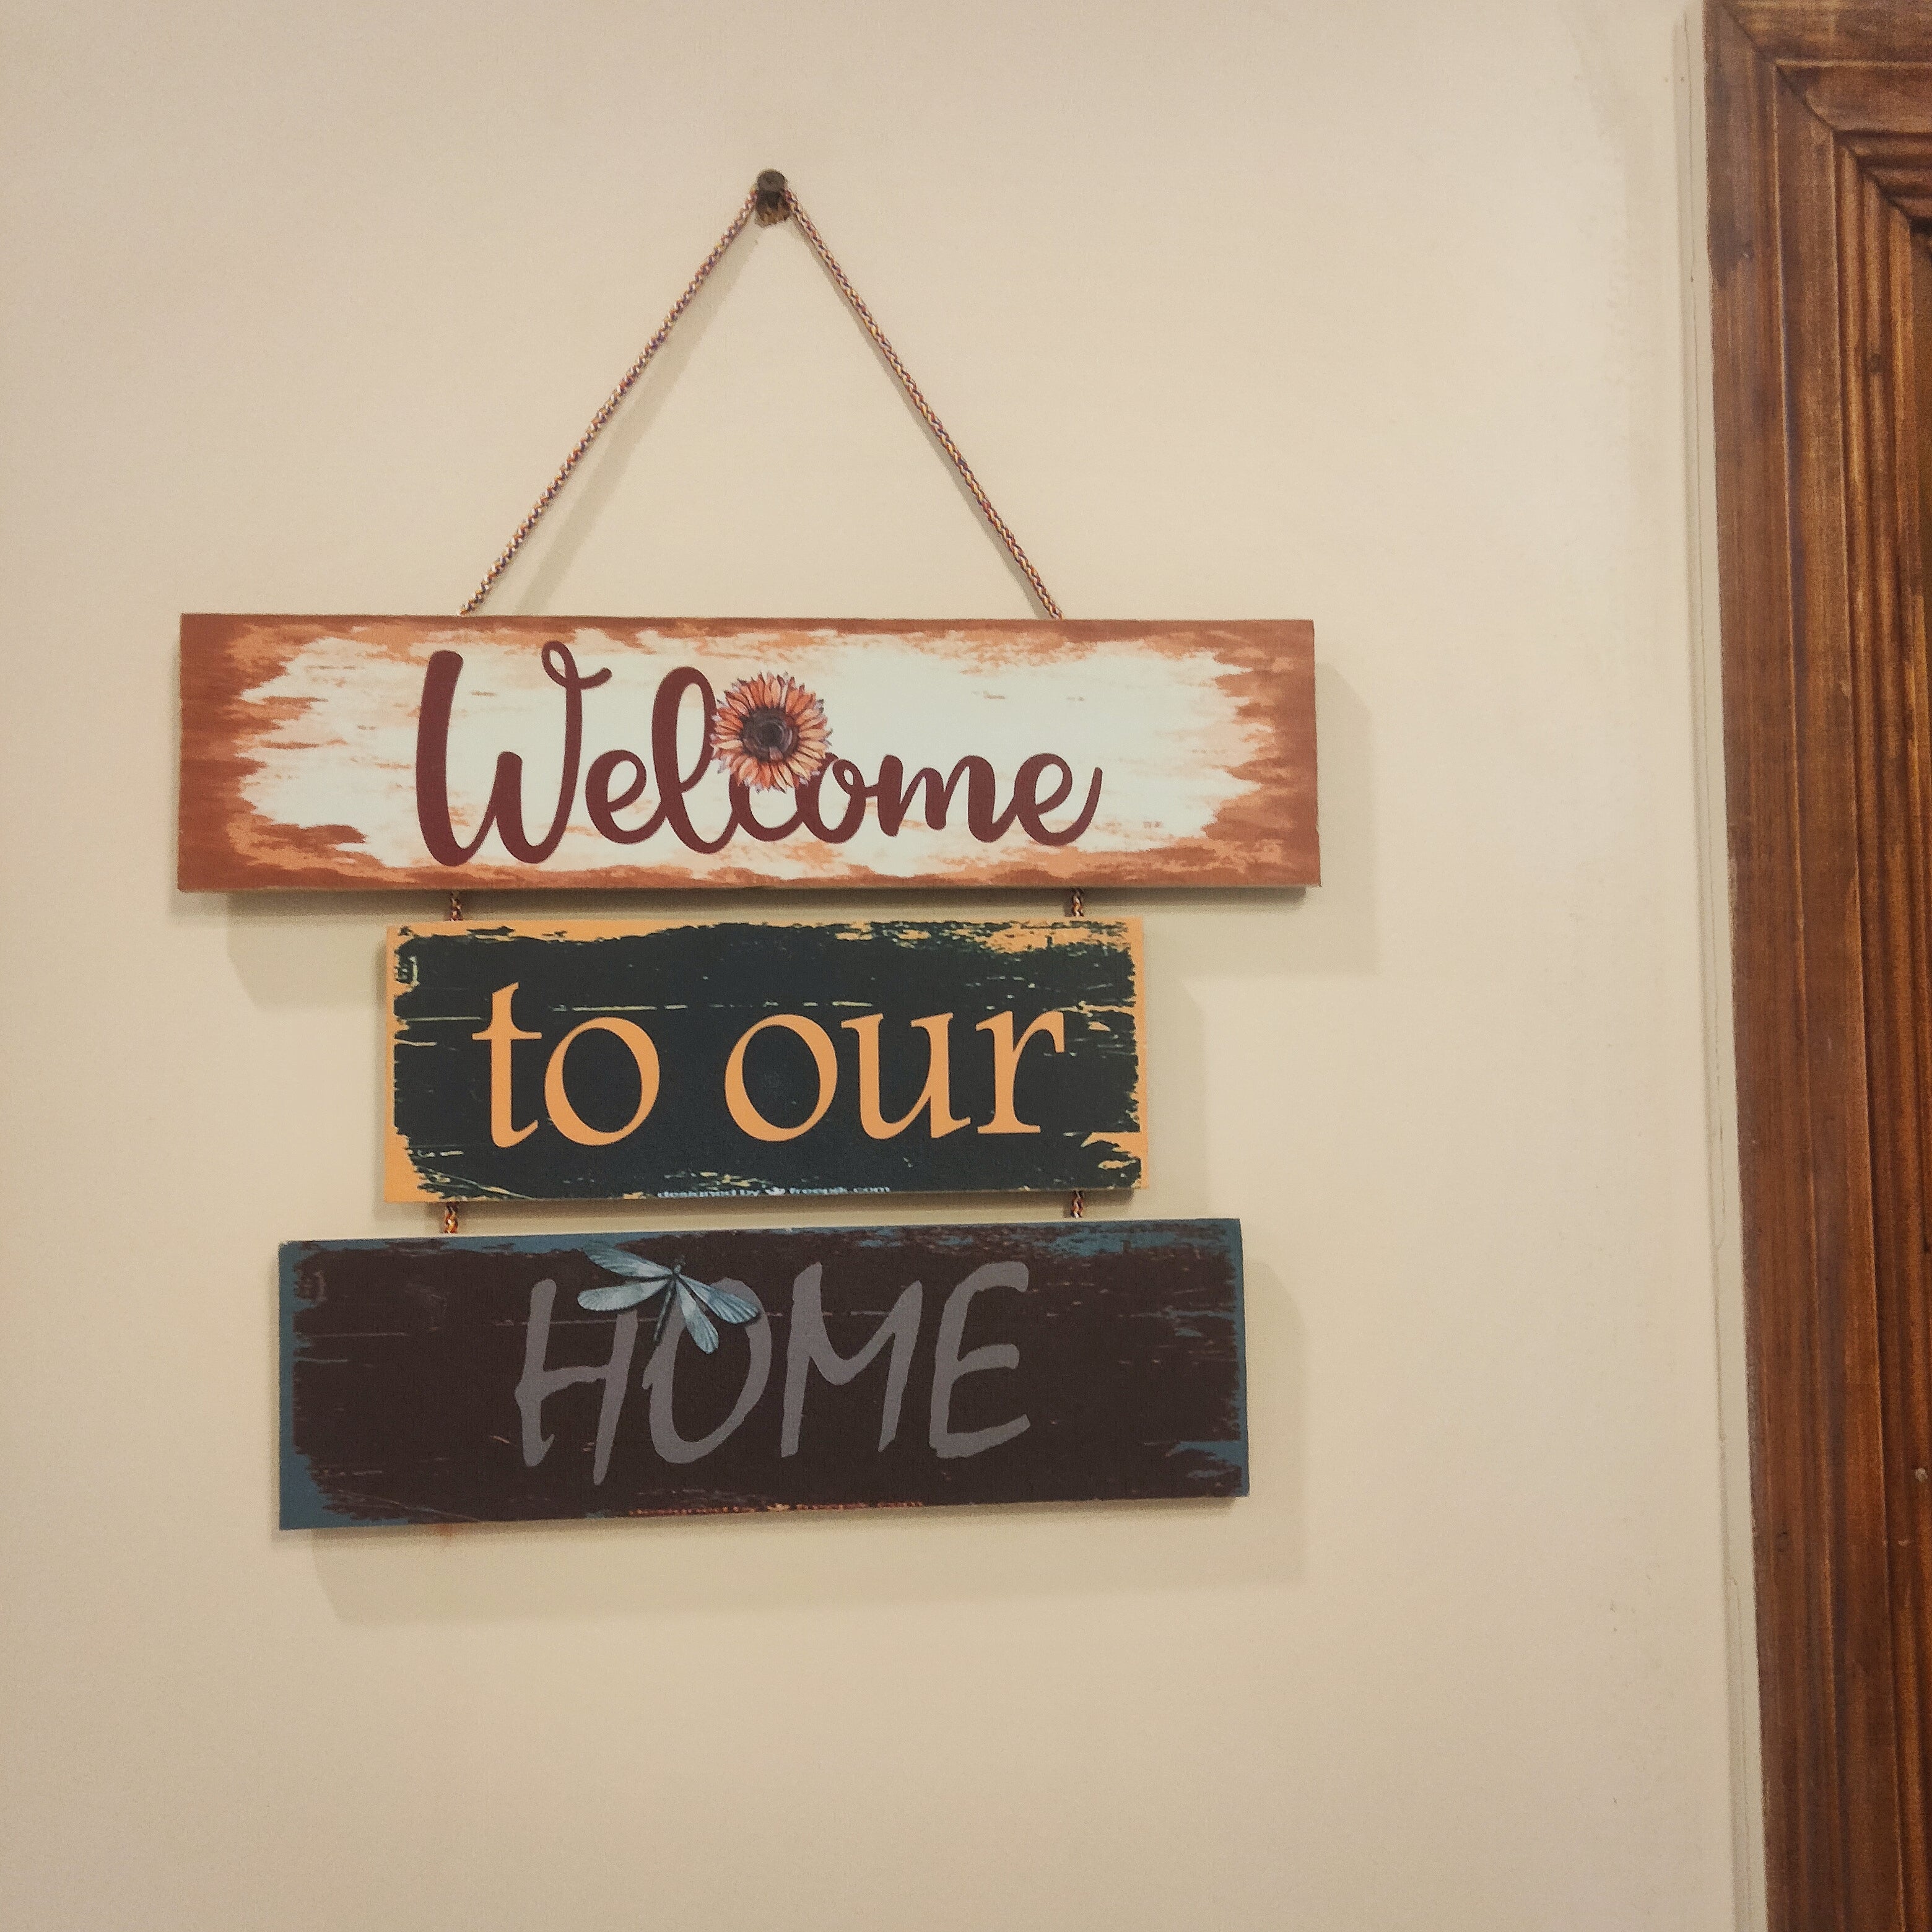 Welcome to our home quotation wall colored hanging vintage look design wall hanging